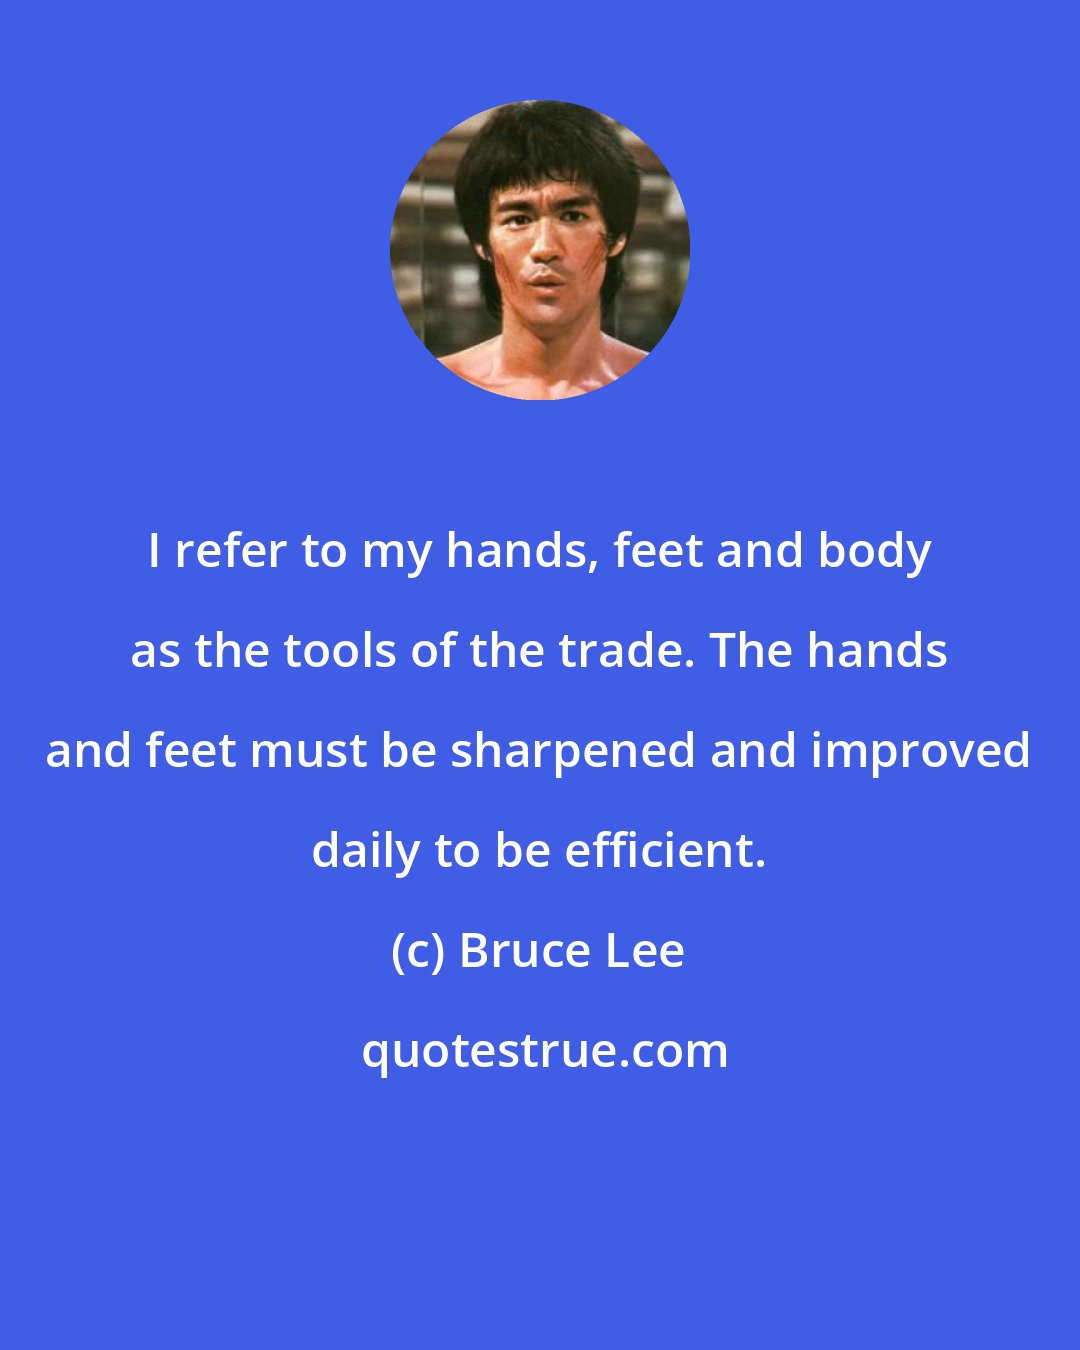 Bruce Lee: I refer to my hands, feet and body as the tools of the trade. The hands and feet must be sharpened and improved daily to be efficient.